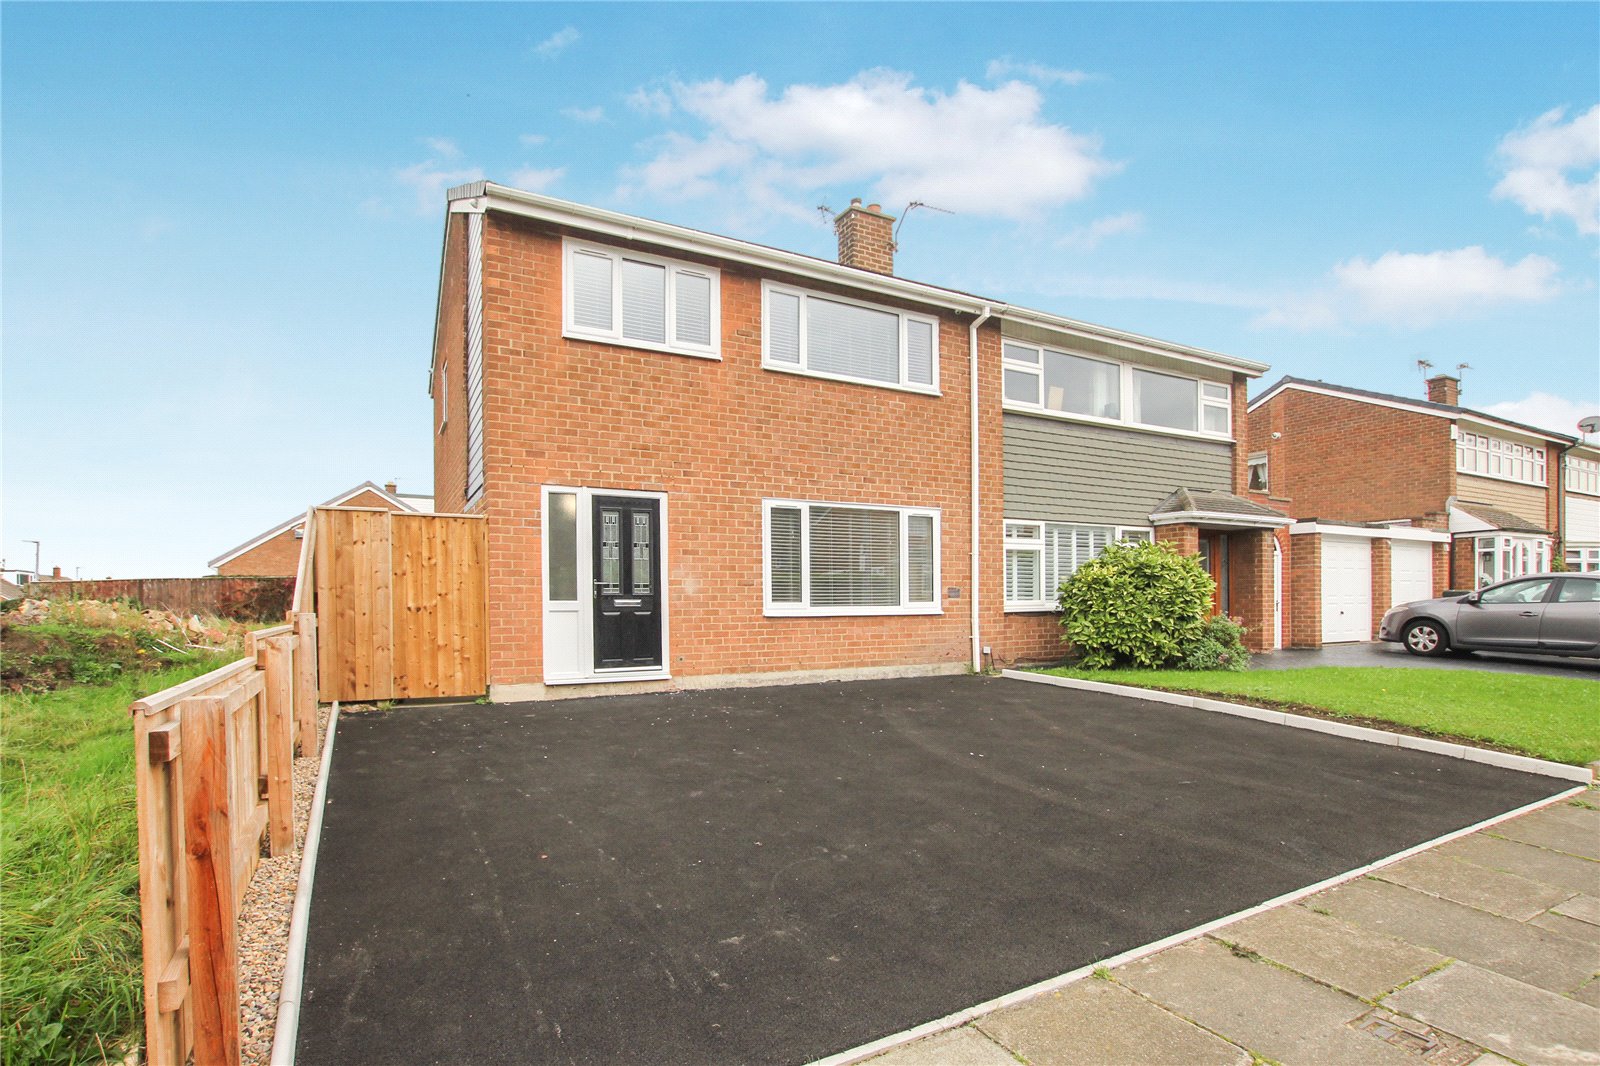 3 bed house for sale in Fountains Drive, Acklam Hall Estate - Property Image 1